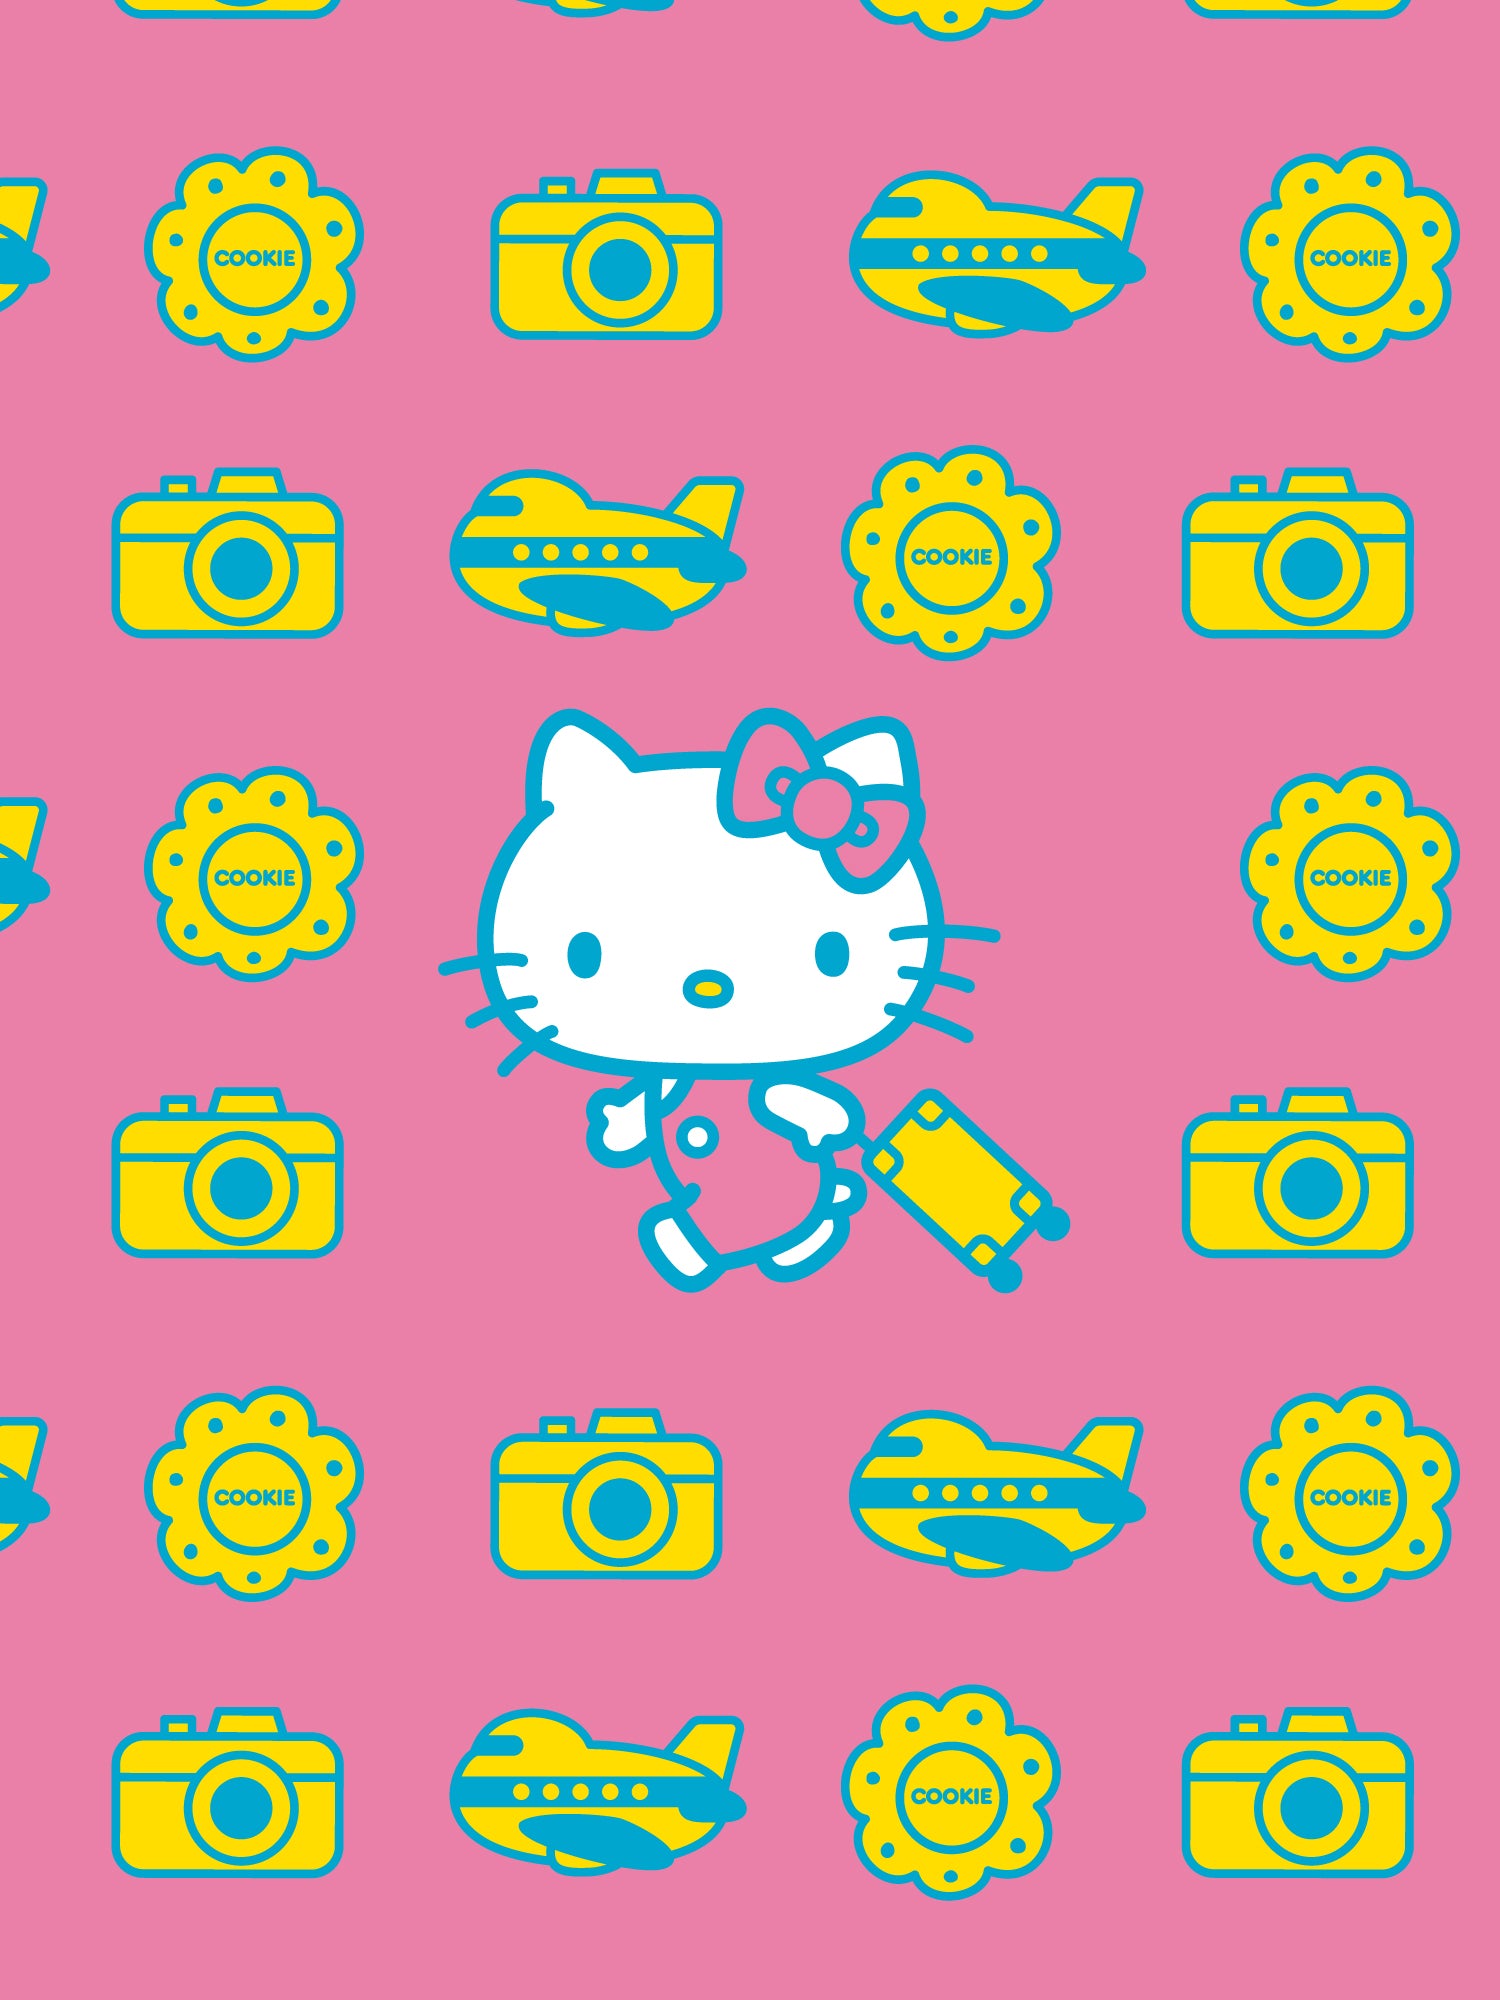 Wallpapers – Hello Kitty's 45th Anniversary Pop-Up Shop